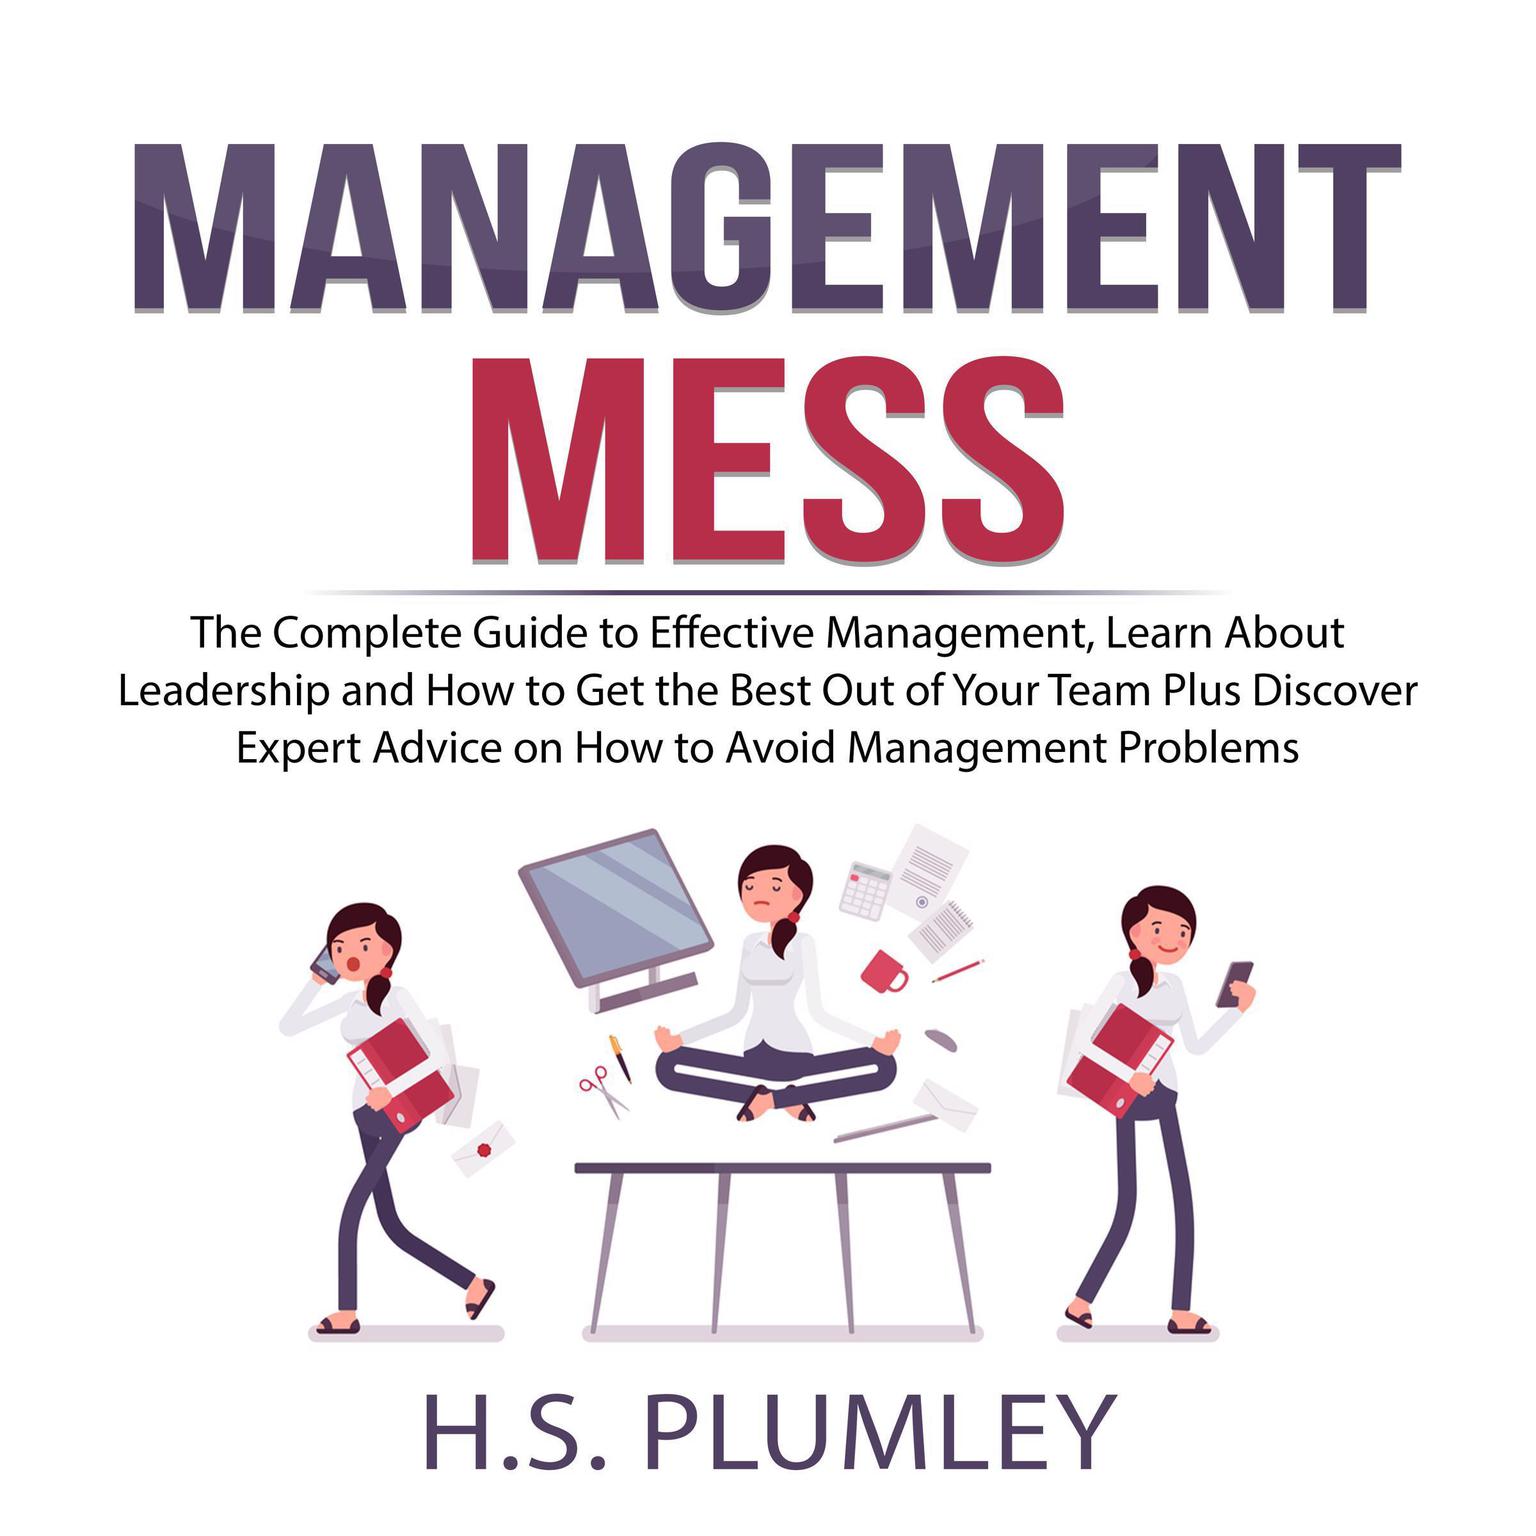 Management Mess: The Complete Guide to Effective Management, Learn About Leadership and How to Get the Best Out of Your Team Plus Discover Expert Advice on How to Avoid Management Problems Audiobook, by H.S. Plumley